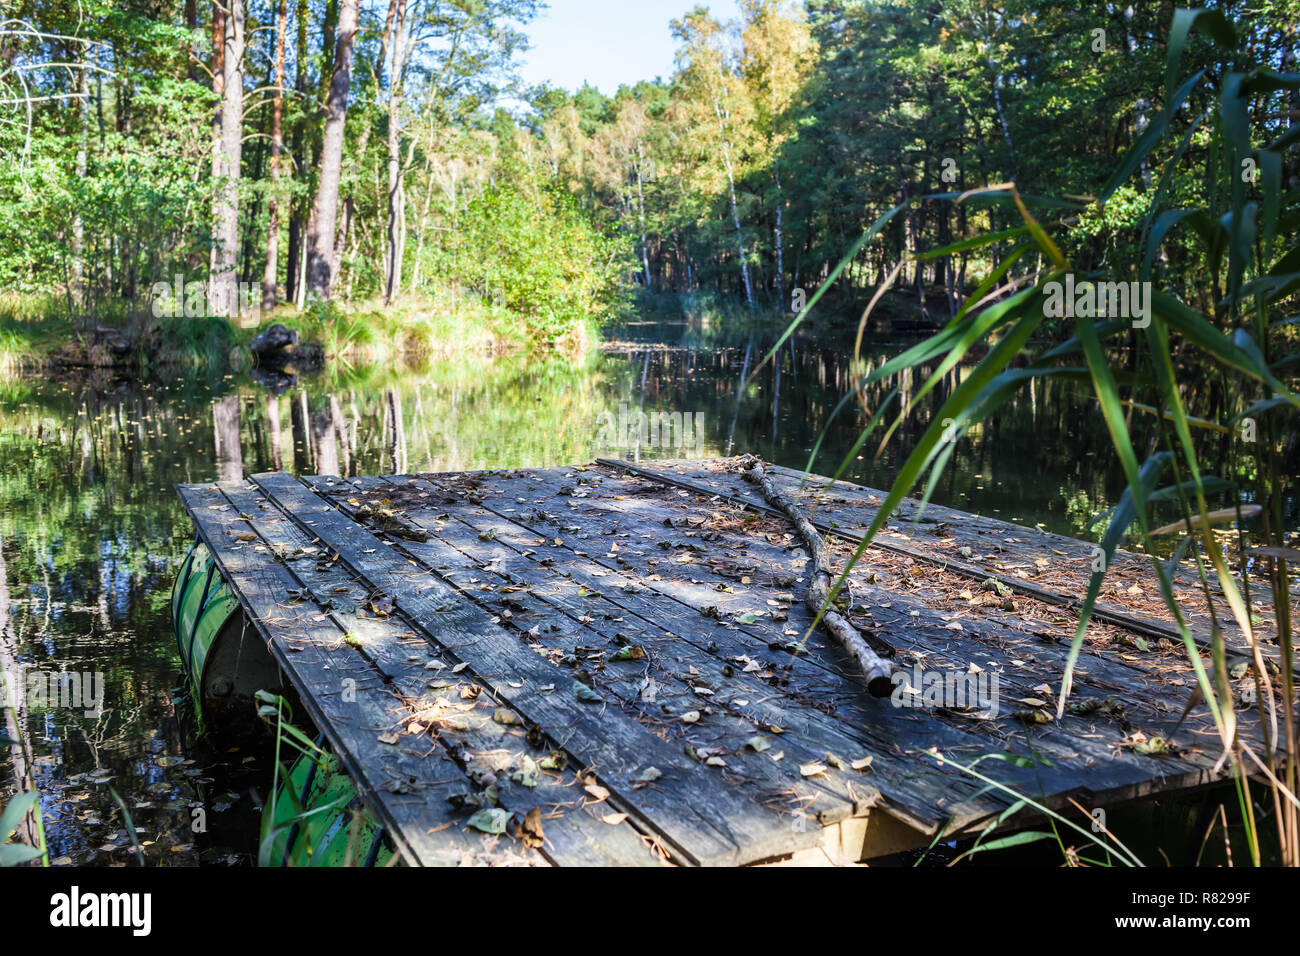 Selfmade raft built by old oil barrels and wooden planks, swimming on a small tranquil lake hidden in forest for leisure activity adventure Stock Photo